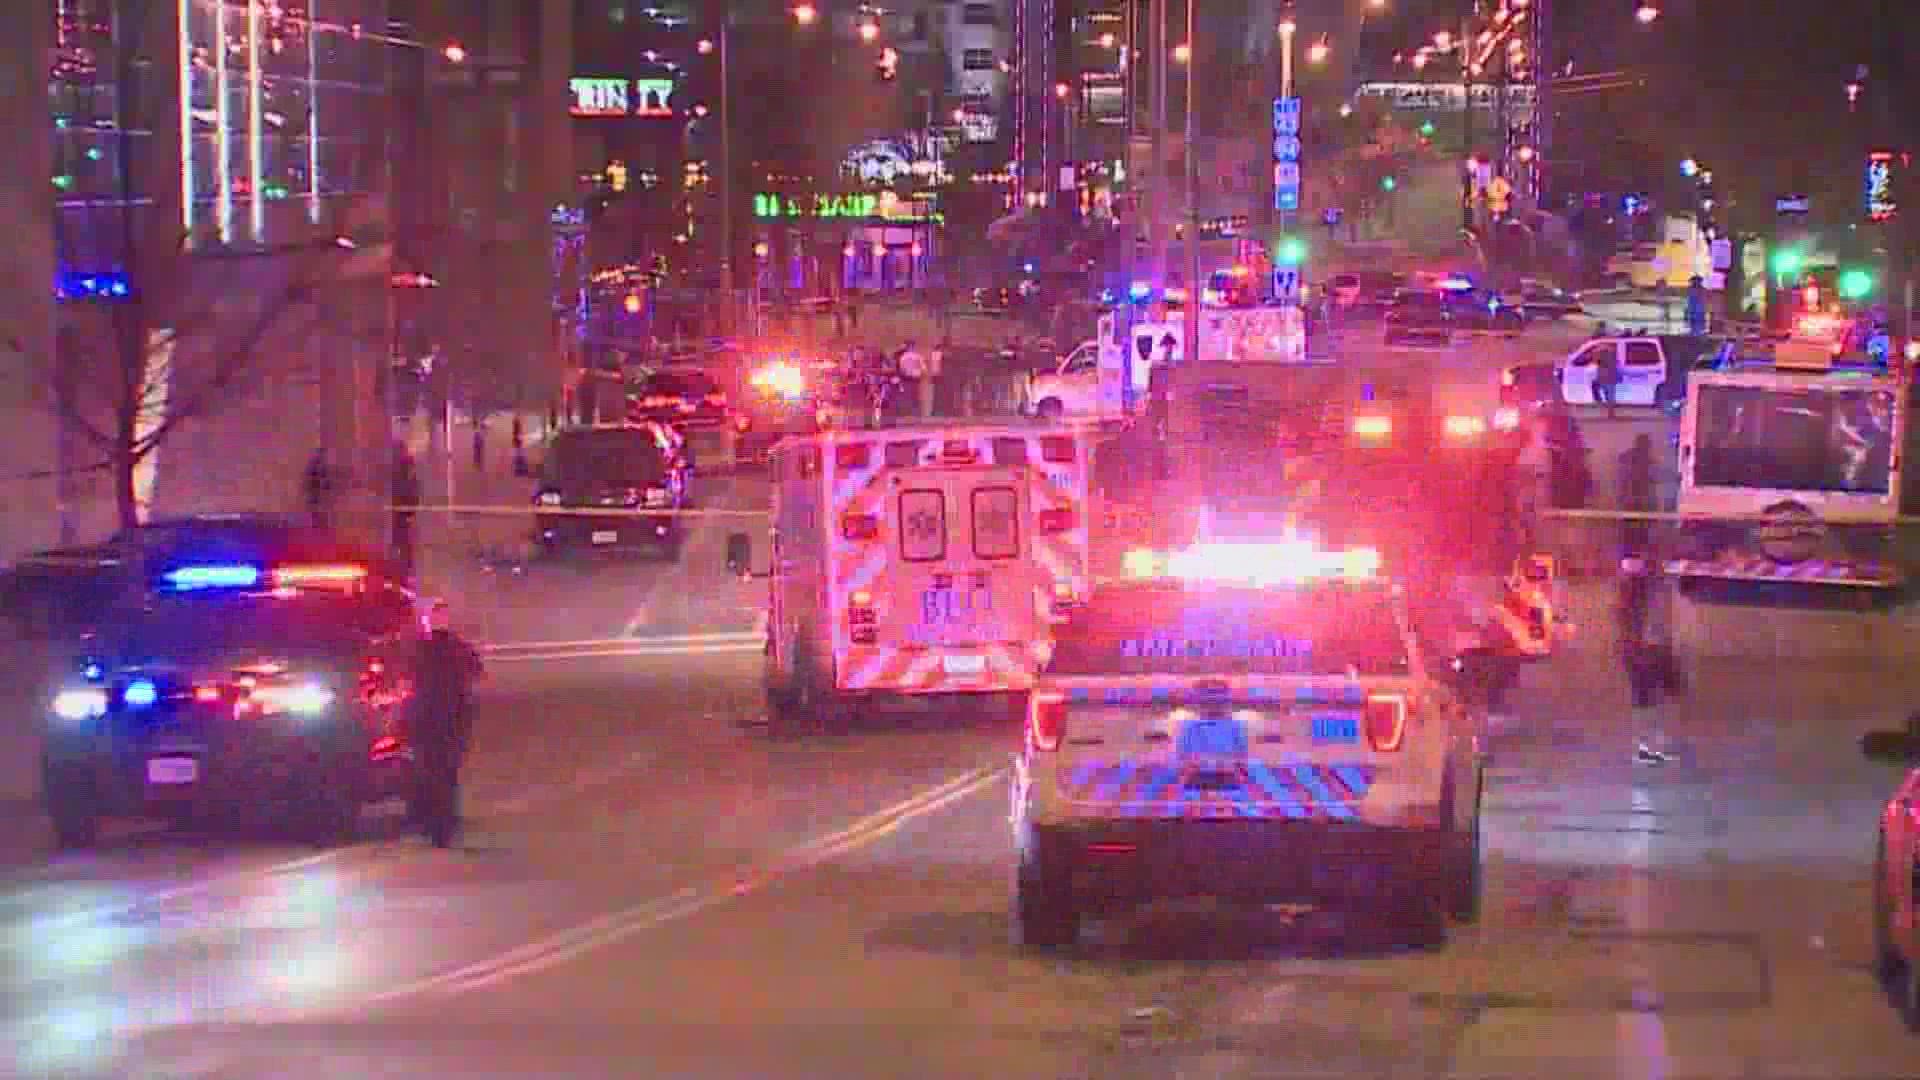 Authorities say 20 people were injured in two shootings in downtown Milwaukee near an entertainment district where thousands of people were watching the Bucks play.